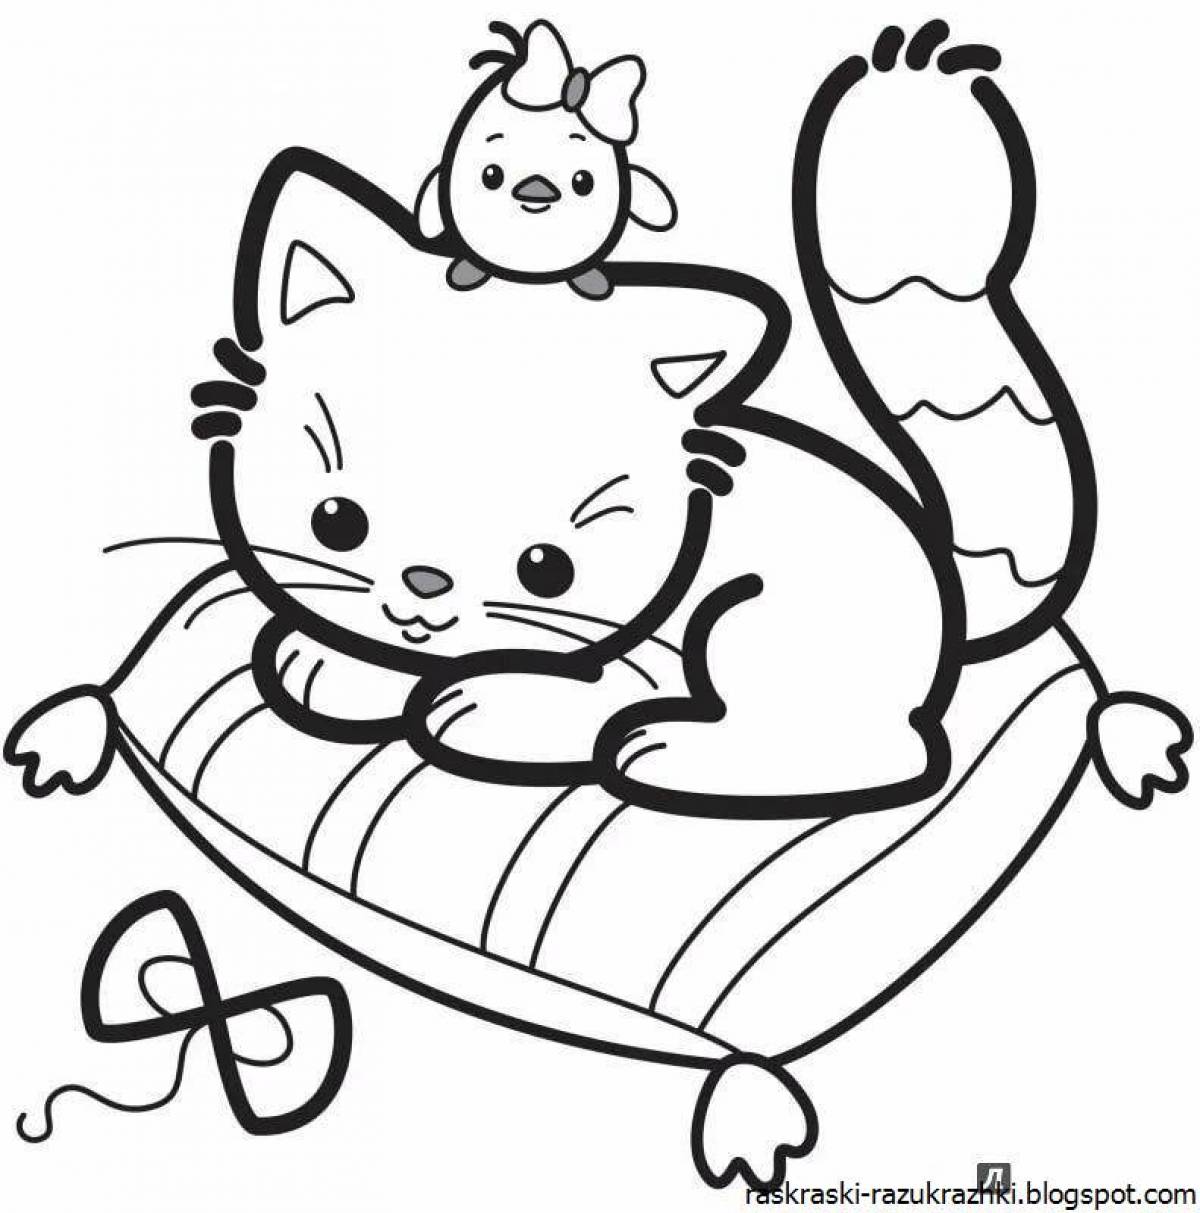 Colorful cat coloring pages for kids